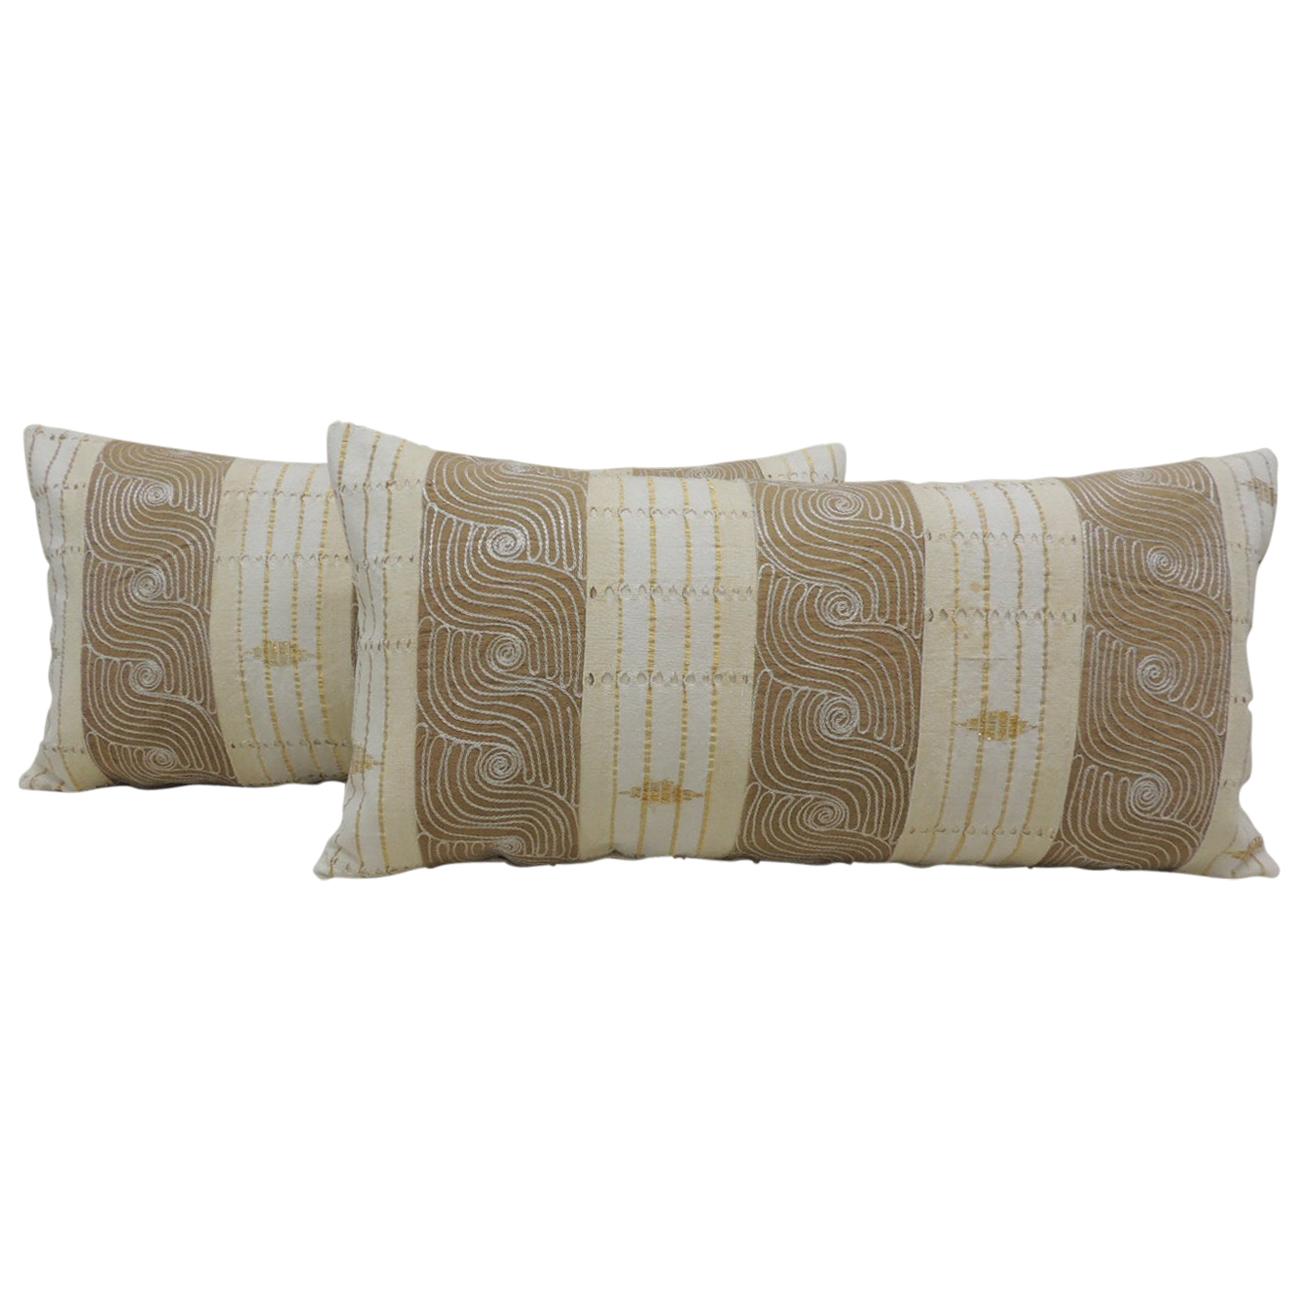 Vintage Tan And White Woven Ewe Stripweaves African Bolster Decorative